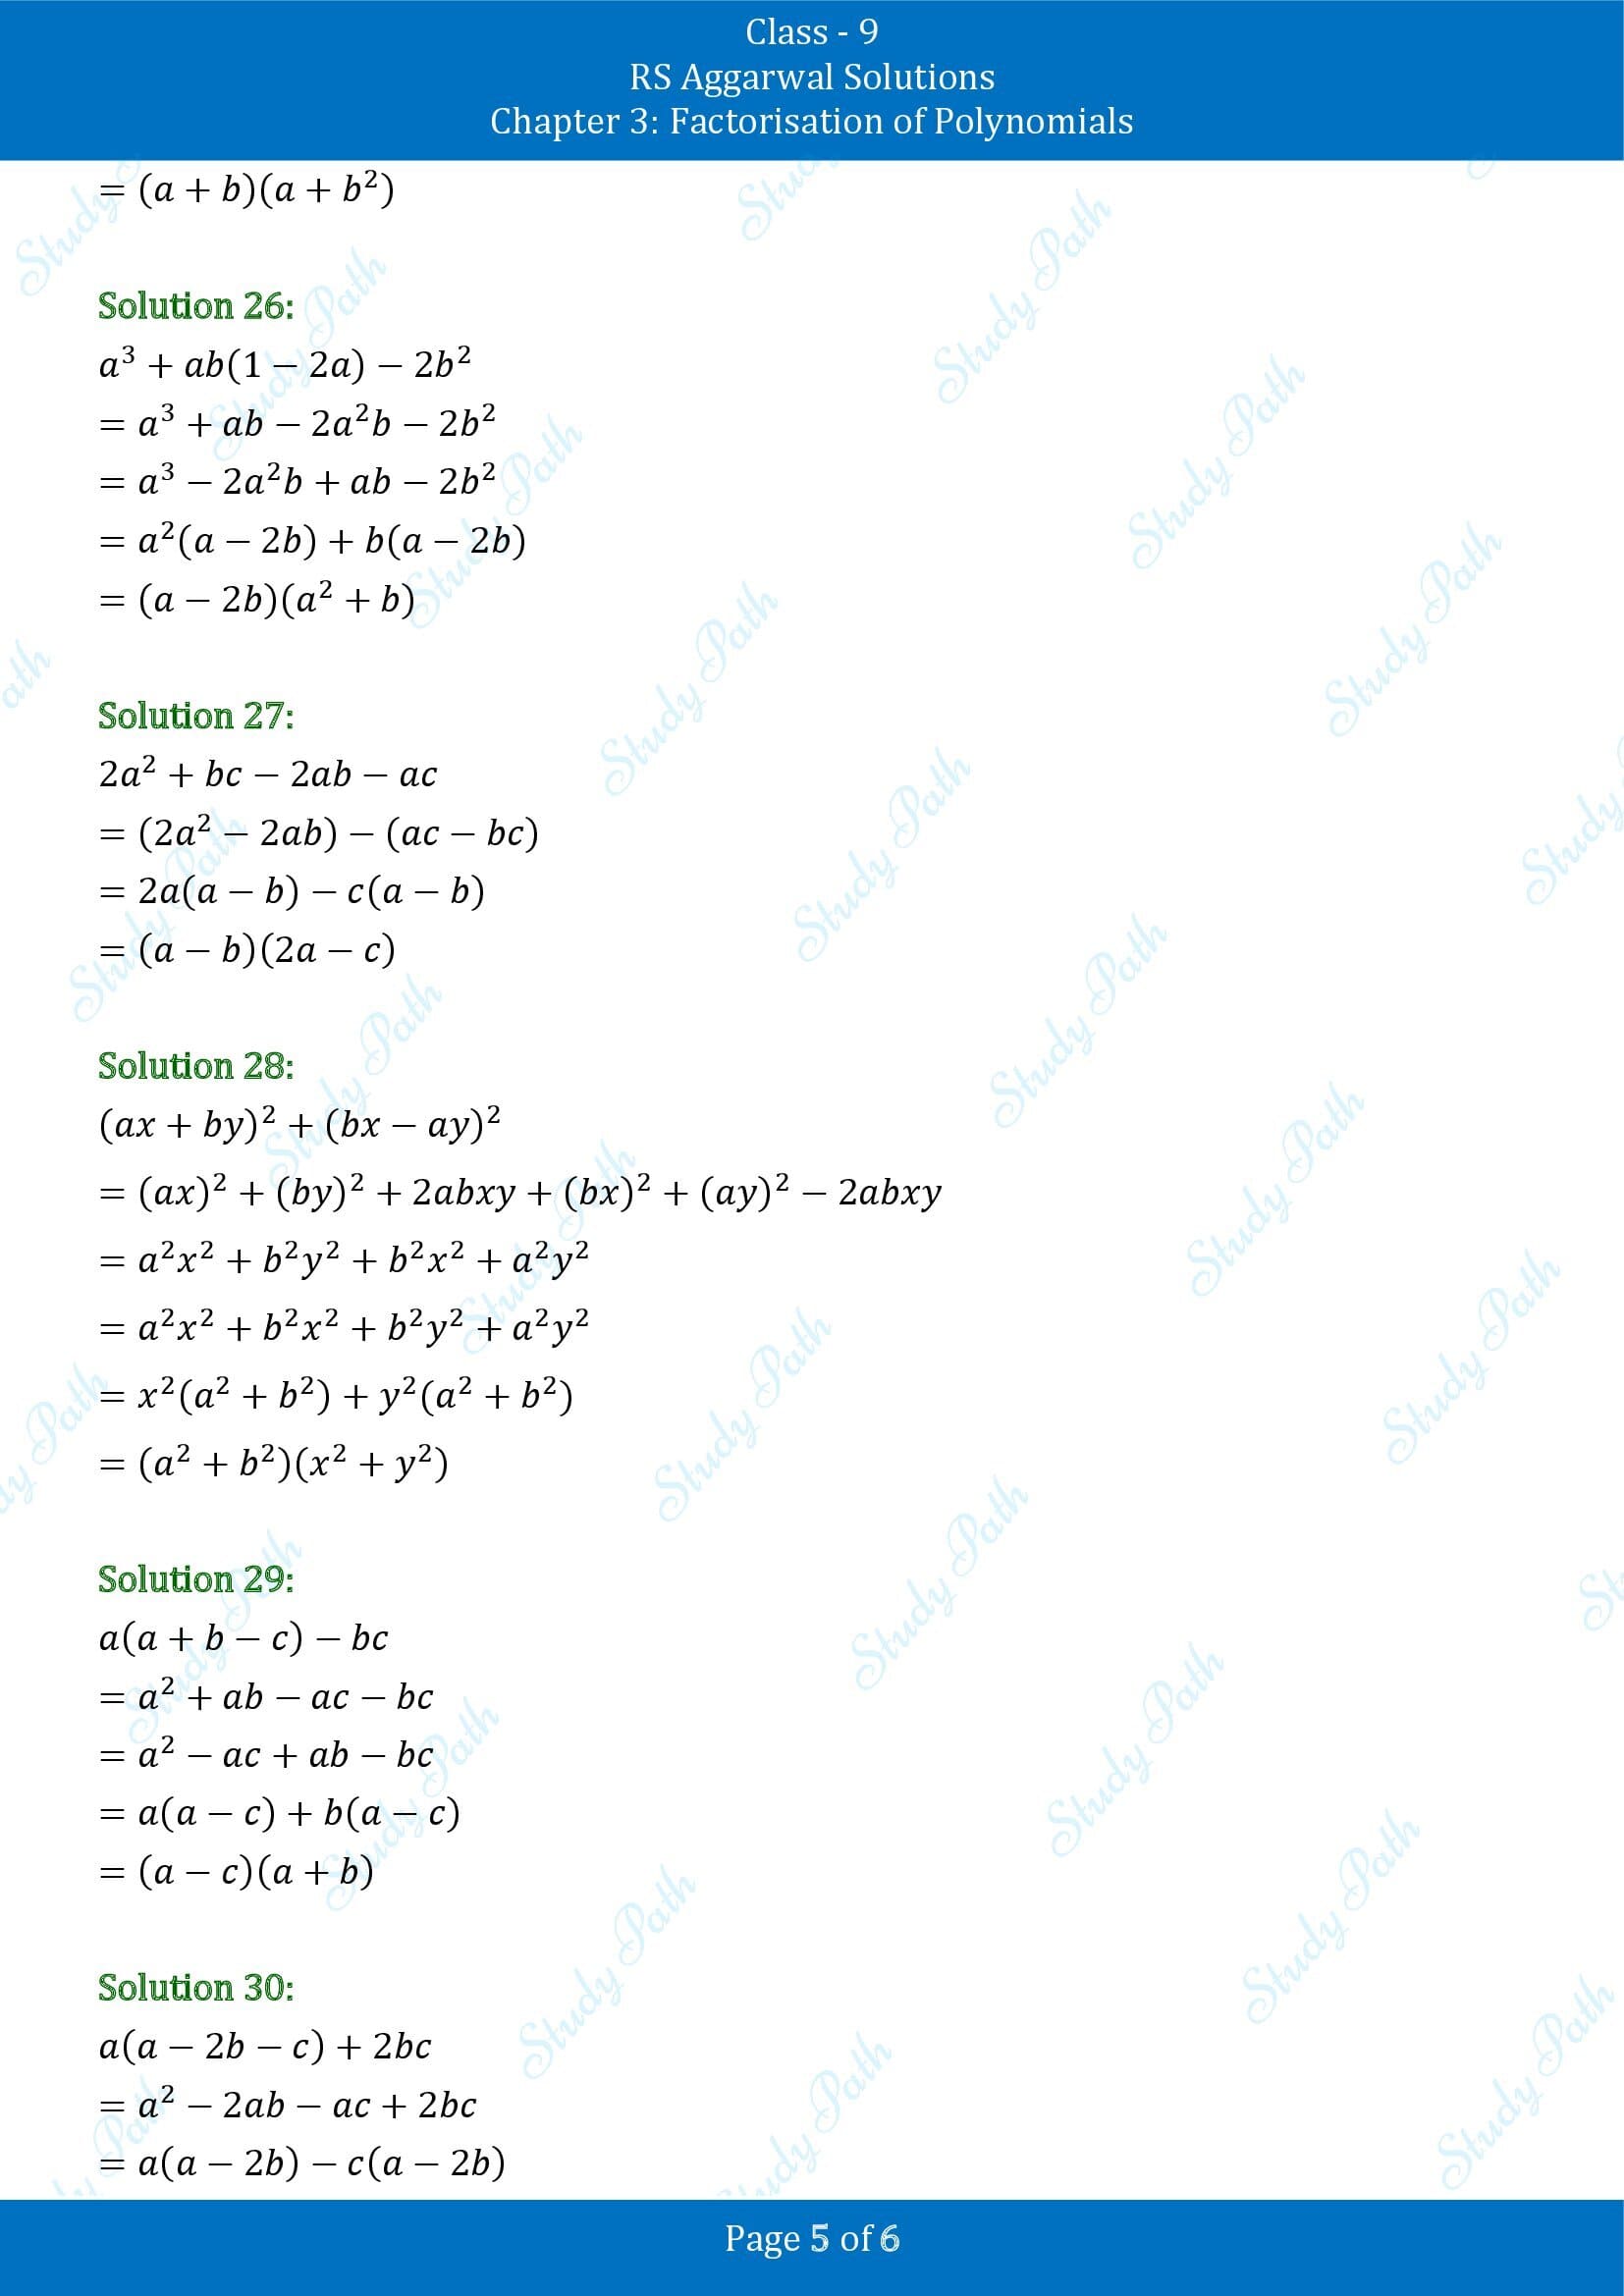 RS Aggarwal Solutions Class 9 Chapter 3 Factorisation of Polynomials Exercise 3A 00005